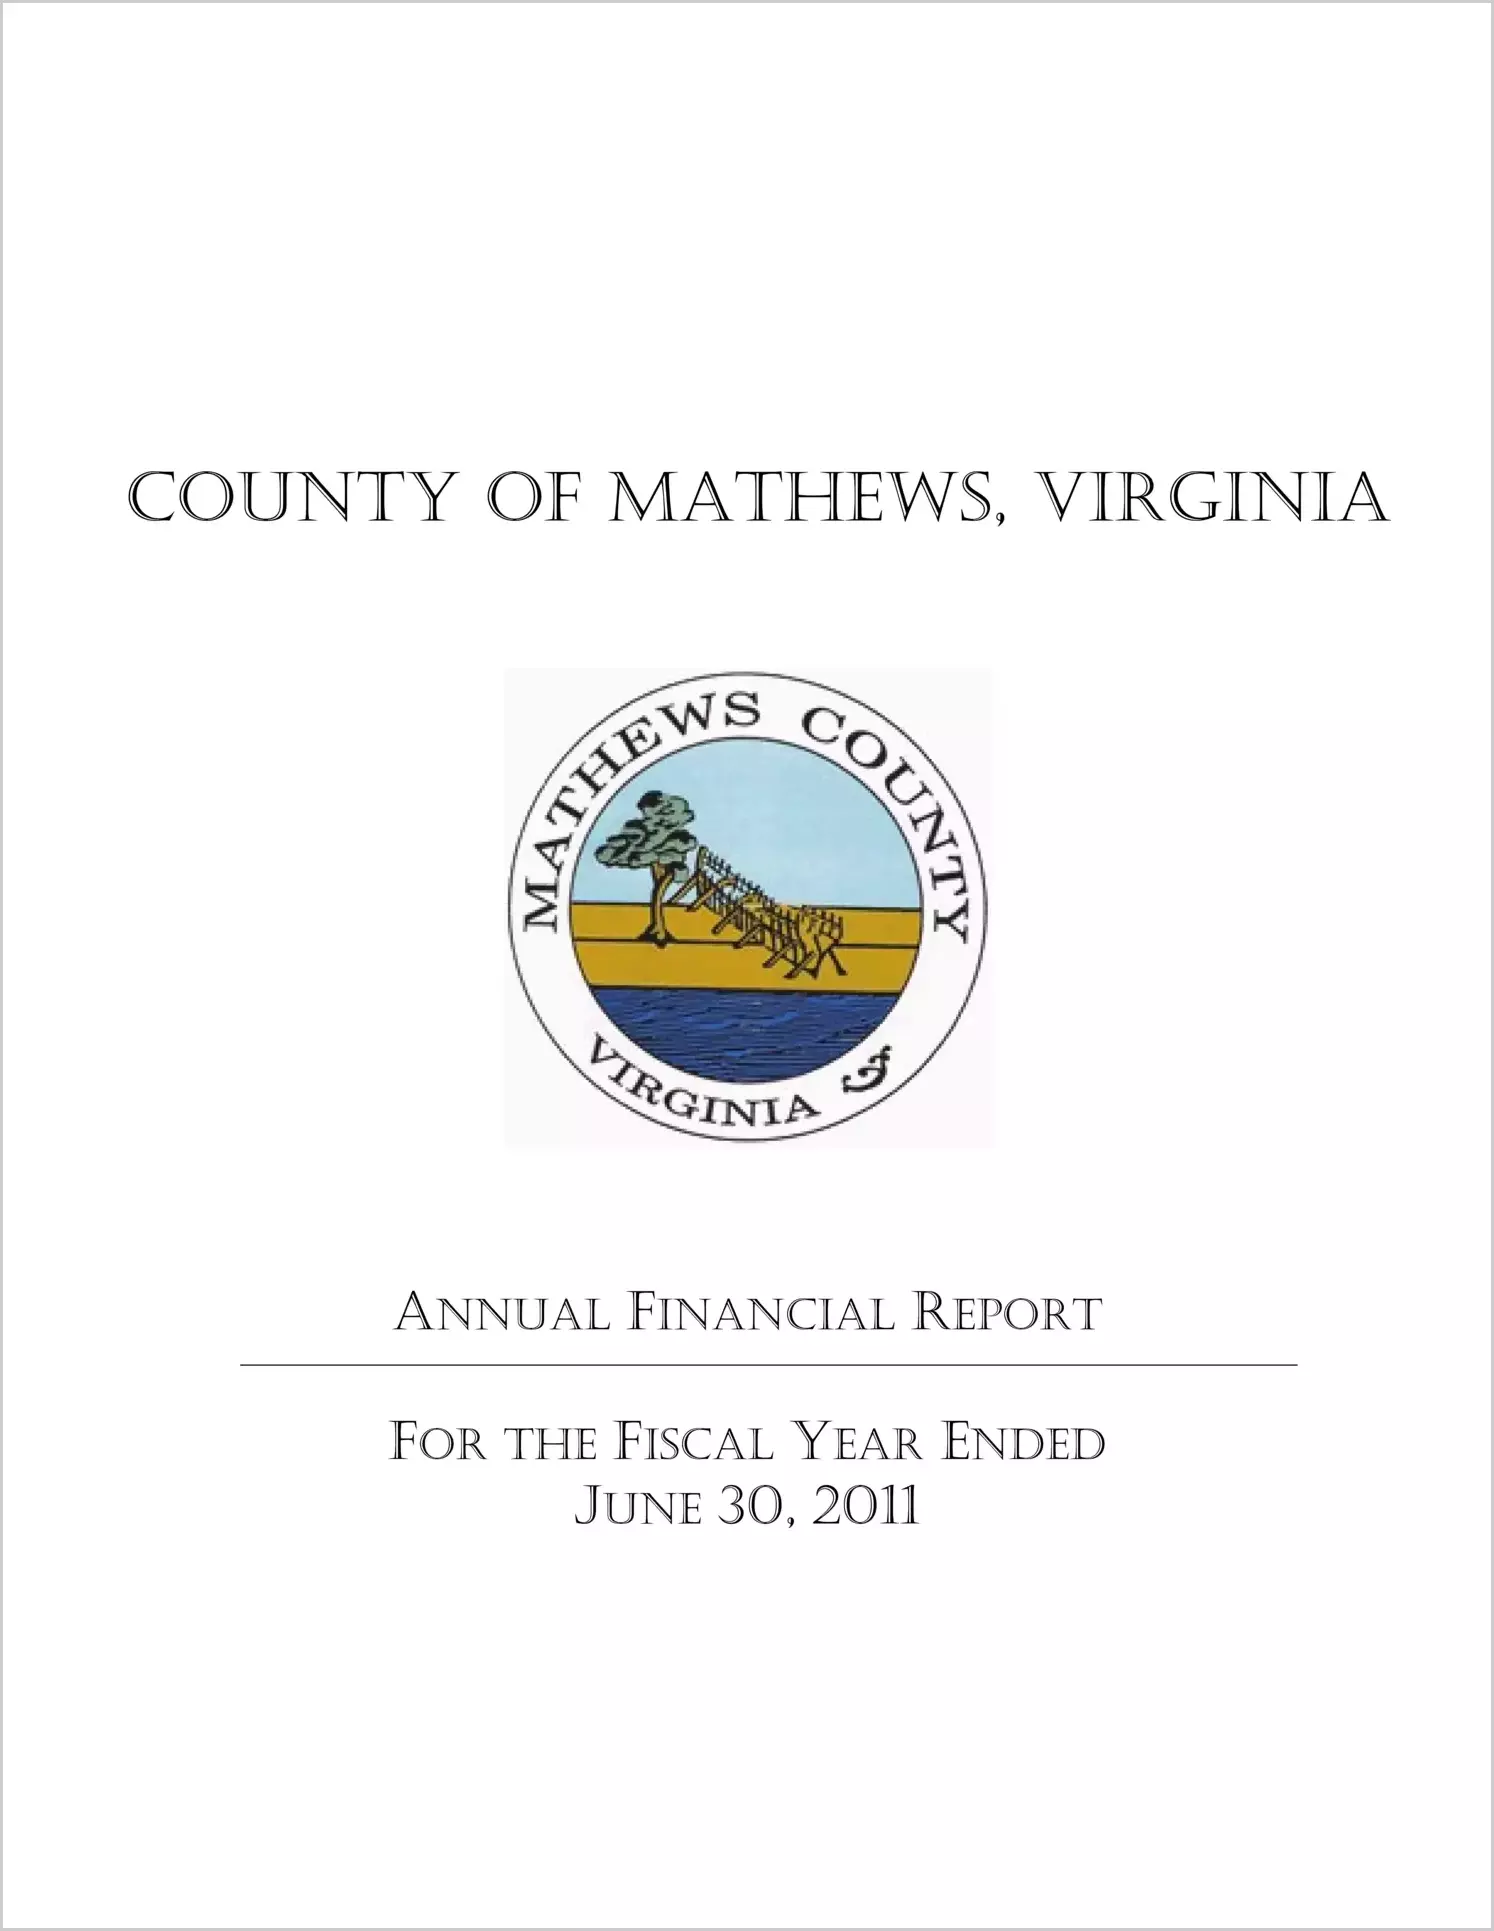 2011 Annual Financial Report for County of Mathews